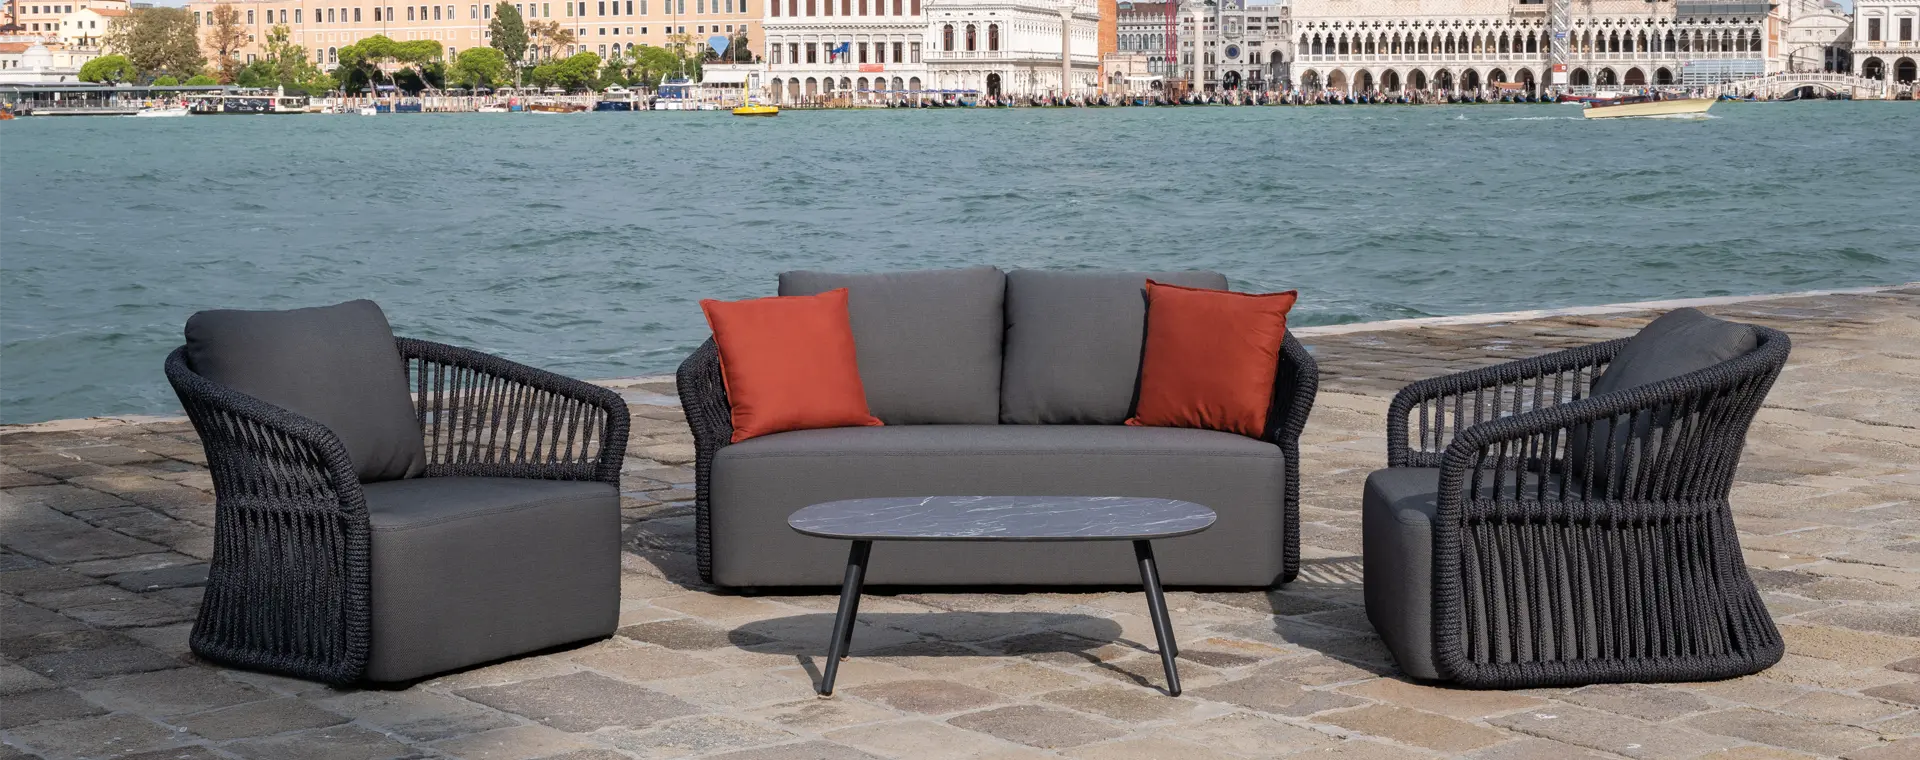 Method collection : Lounge sets, sofas, armchairs and coffee tables for outdoor furnishing